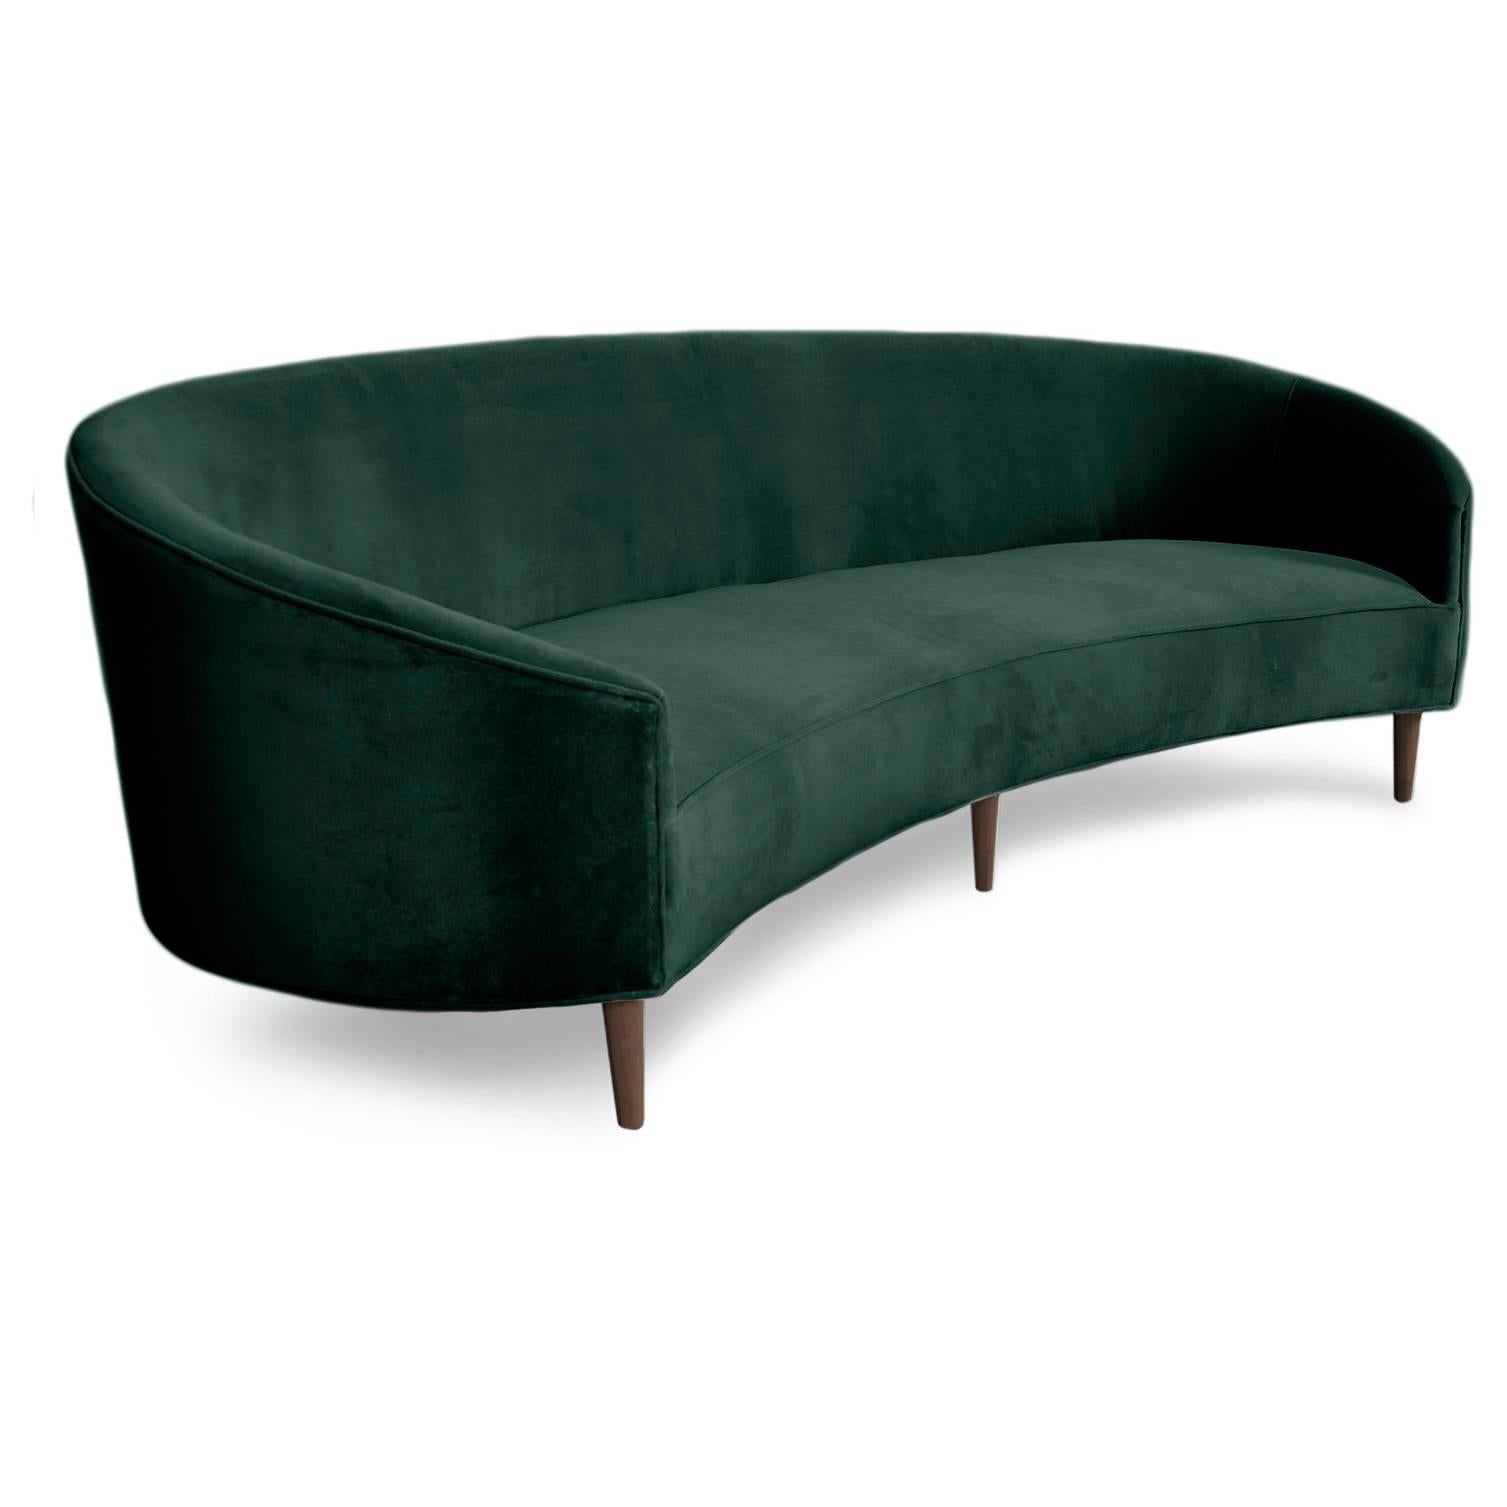 With Classic clean lines and sharp curves comes this Art Deco sofa. Uniquely shaped, similar to a crescent, curved in arms and six walnut cone legs put together in elegance. Shown in Hunter Green velvet.

Measures: 105